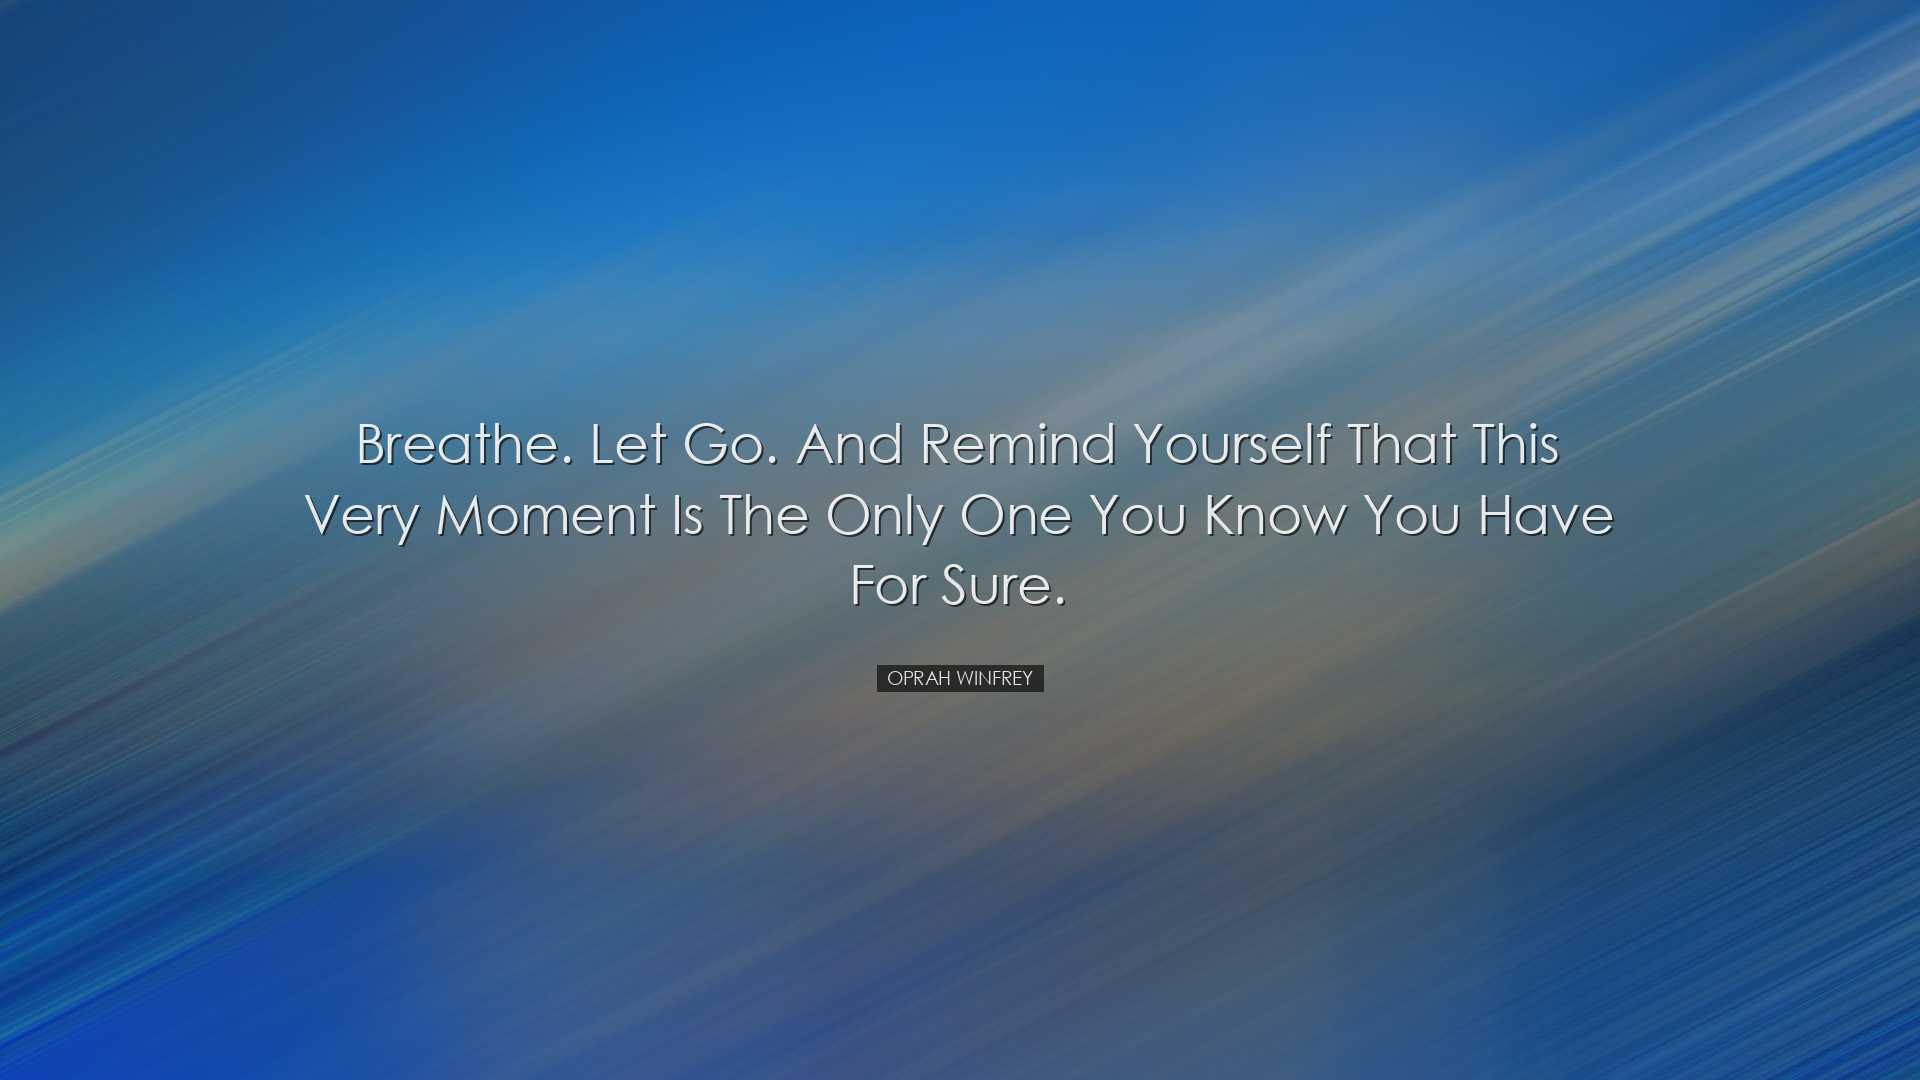 Breathe. Let go. And remind yourself that this very moment is the